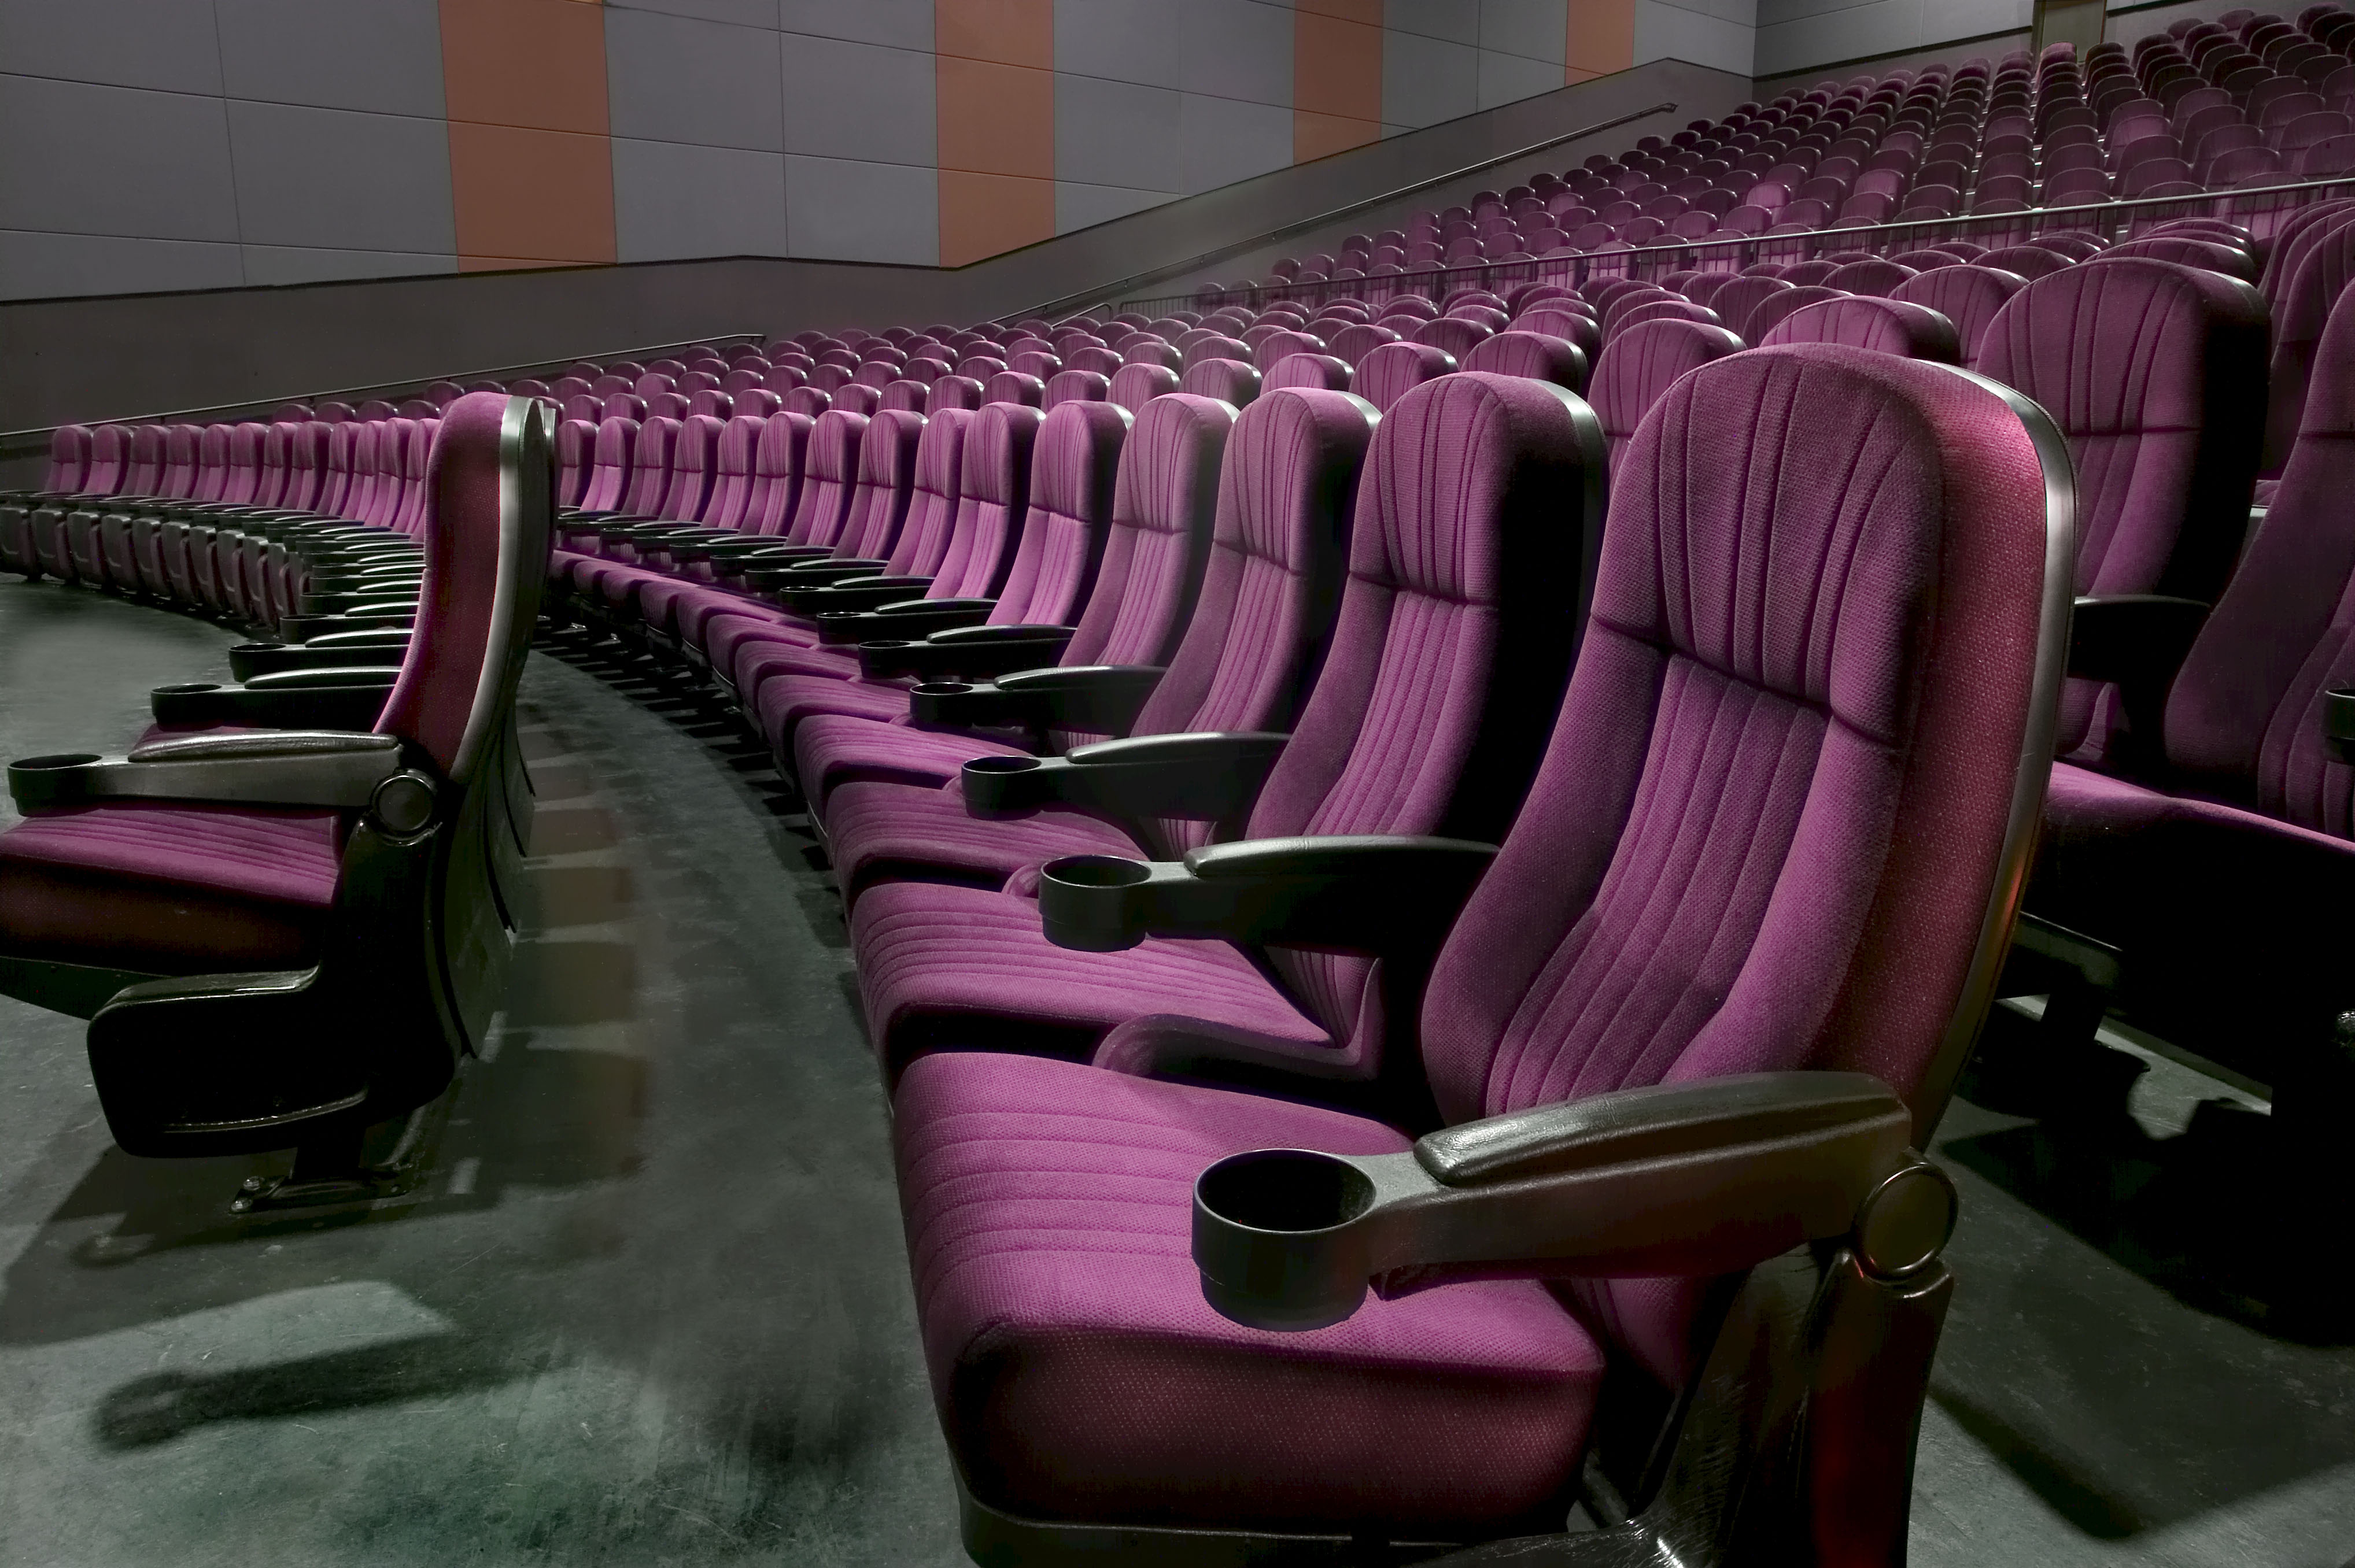 preferredseating  what is fixed theater style seating